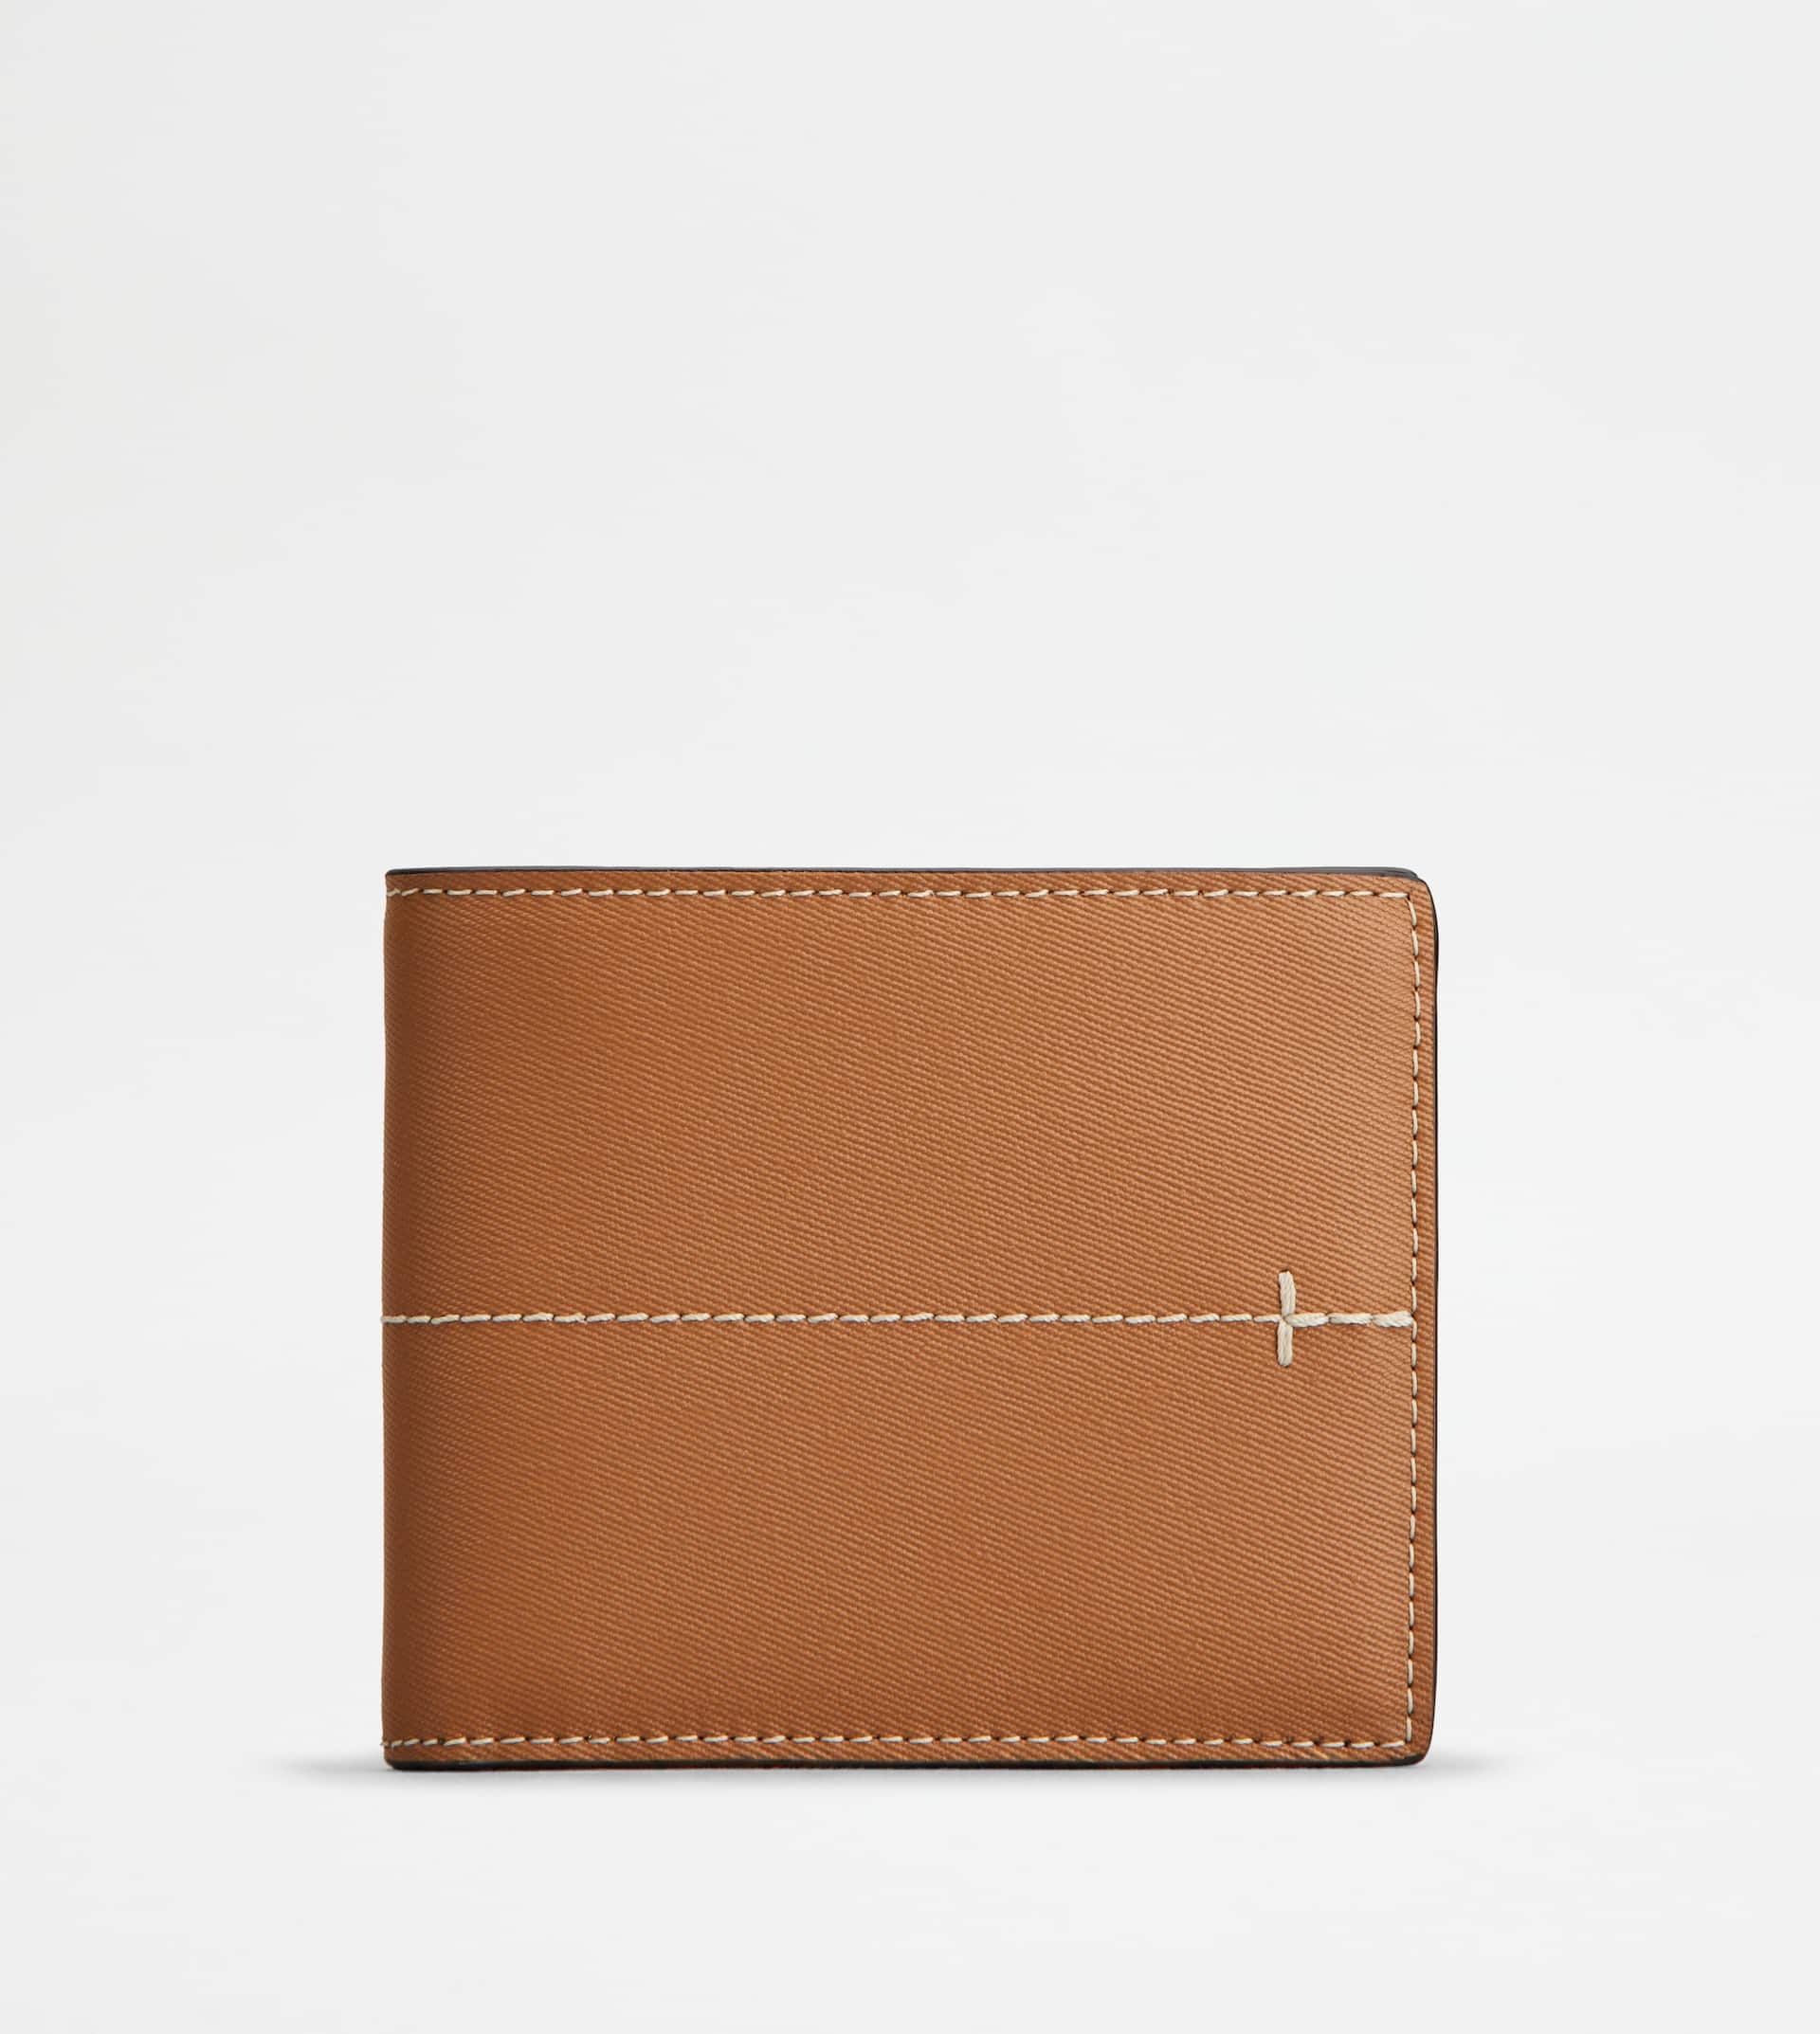 WALLET IN LEATHER - YELLOW, BROWN - 1